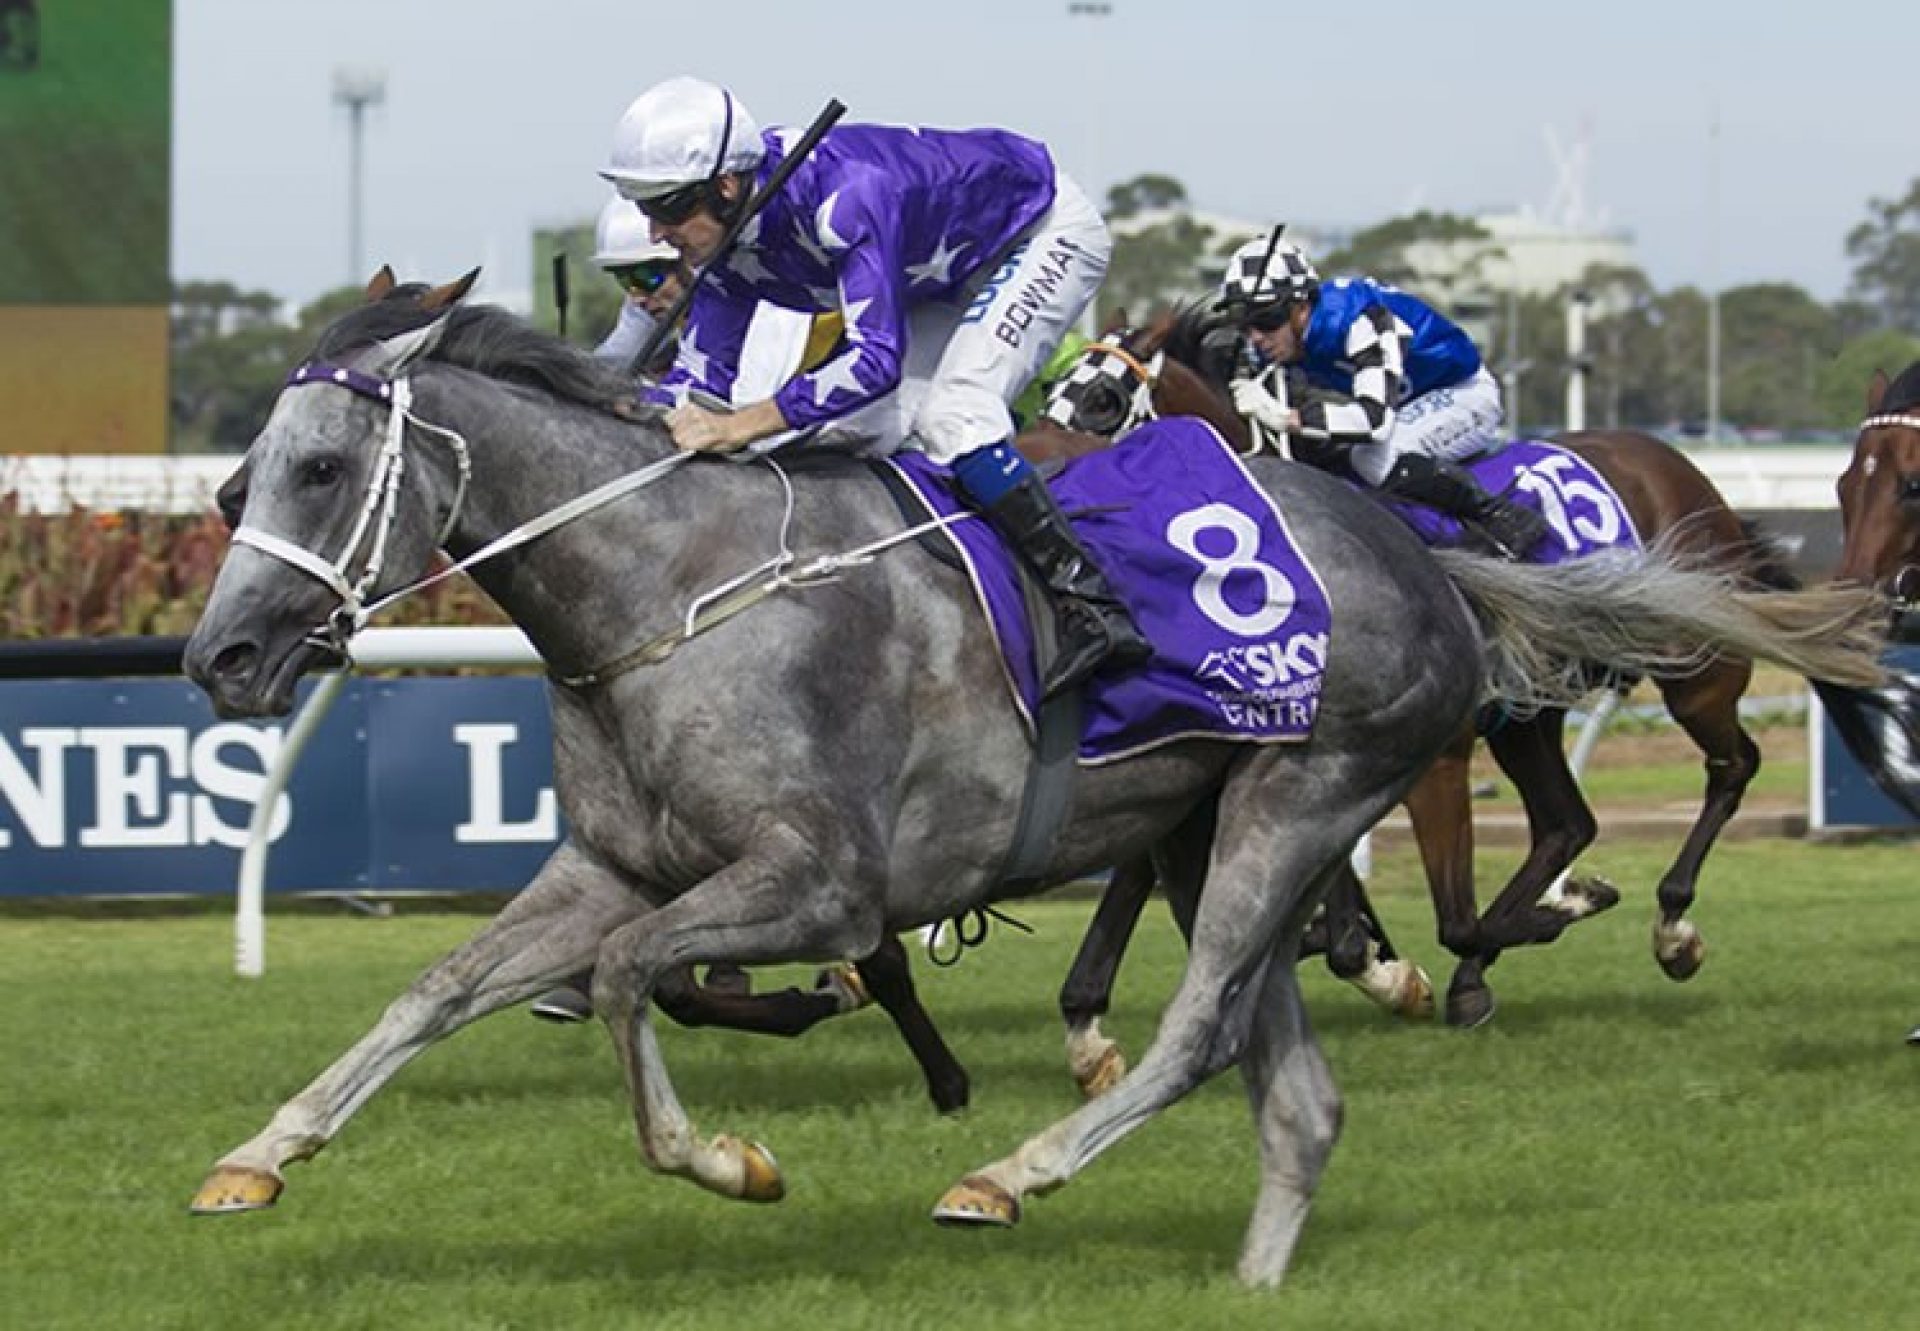 D'Argento (So You Think) winning the G1 Rosehill Guineas at Rosehill